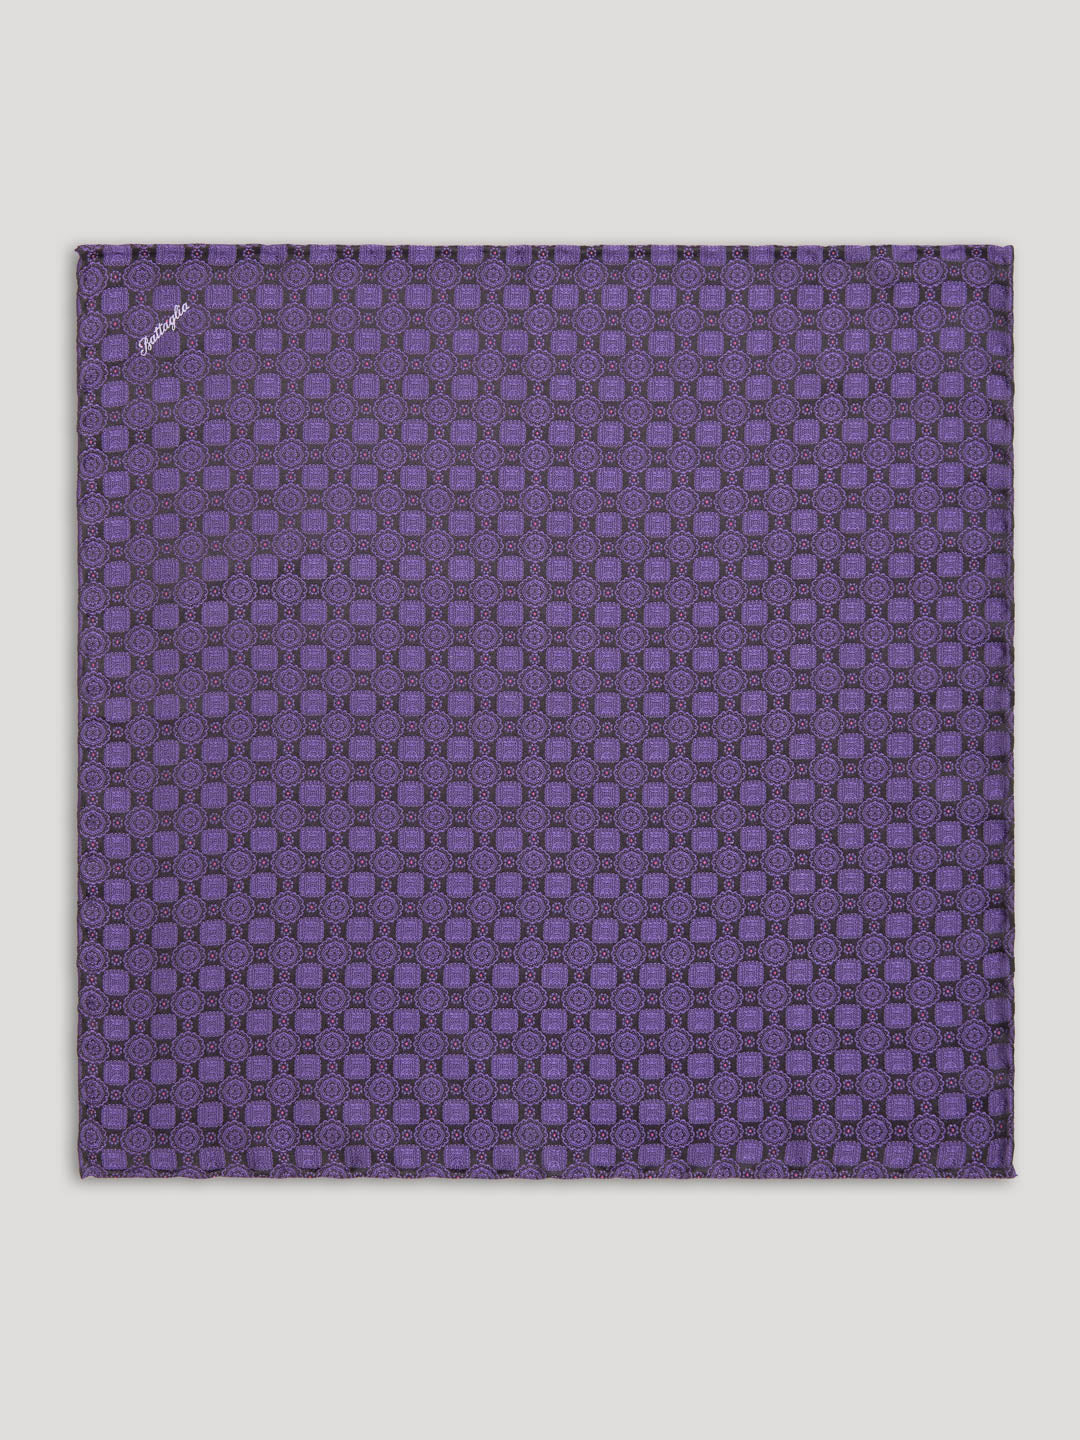 Purple and black silk handkerchief with large pattern